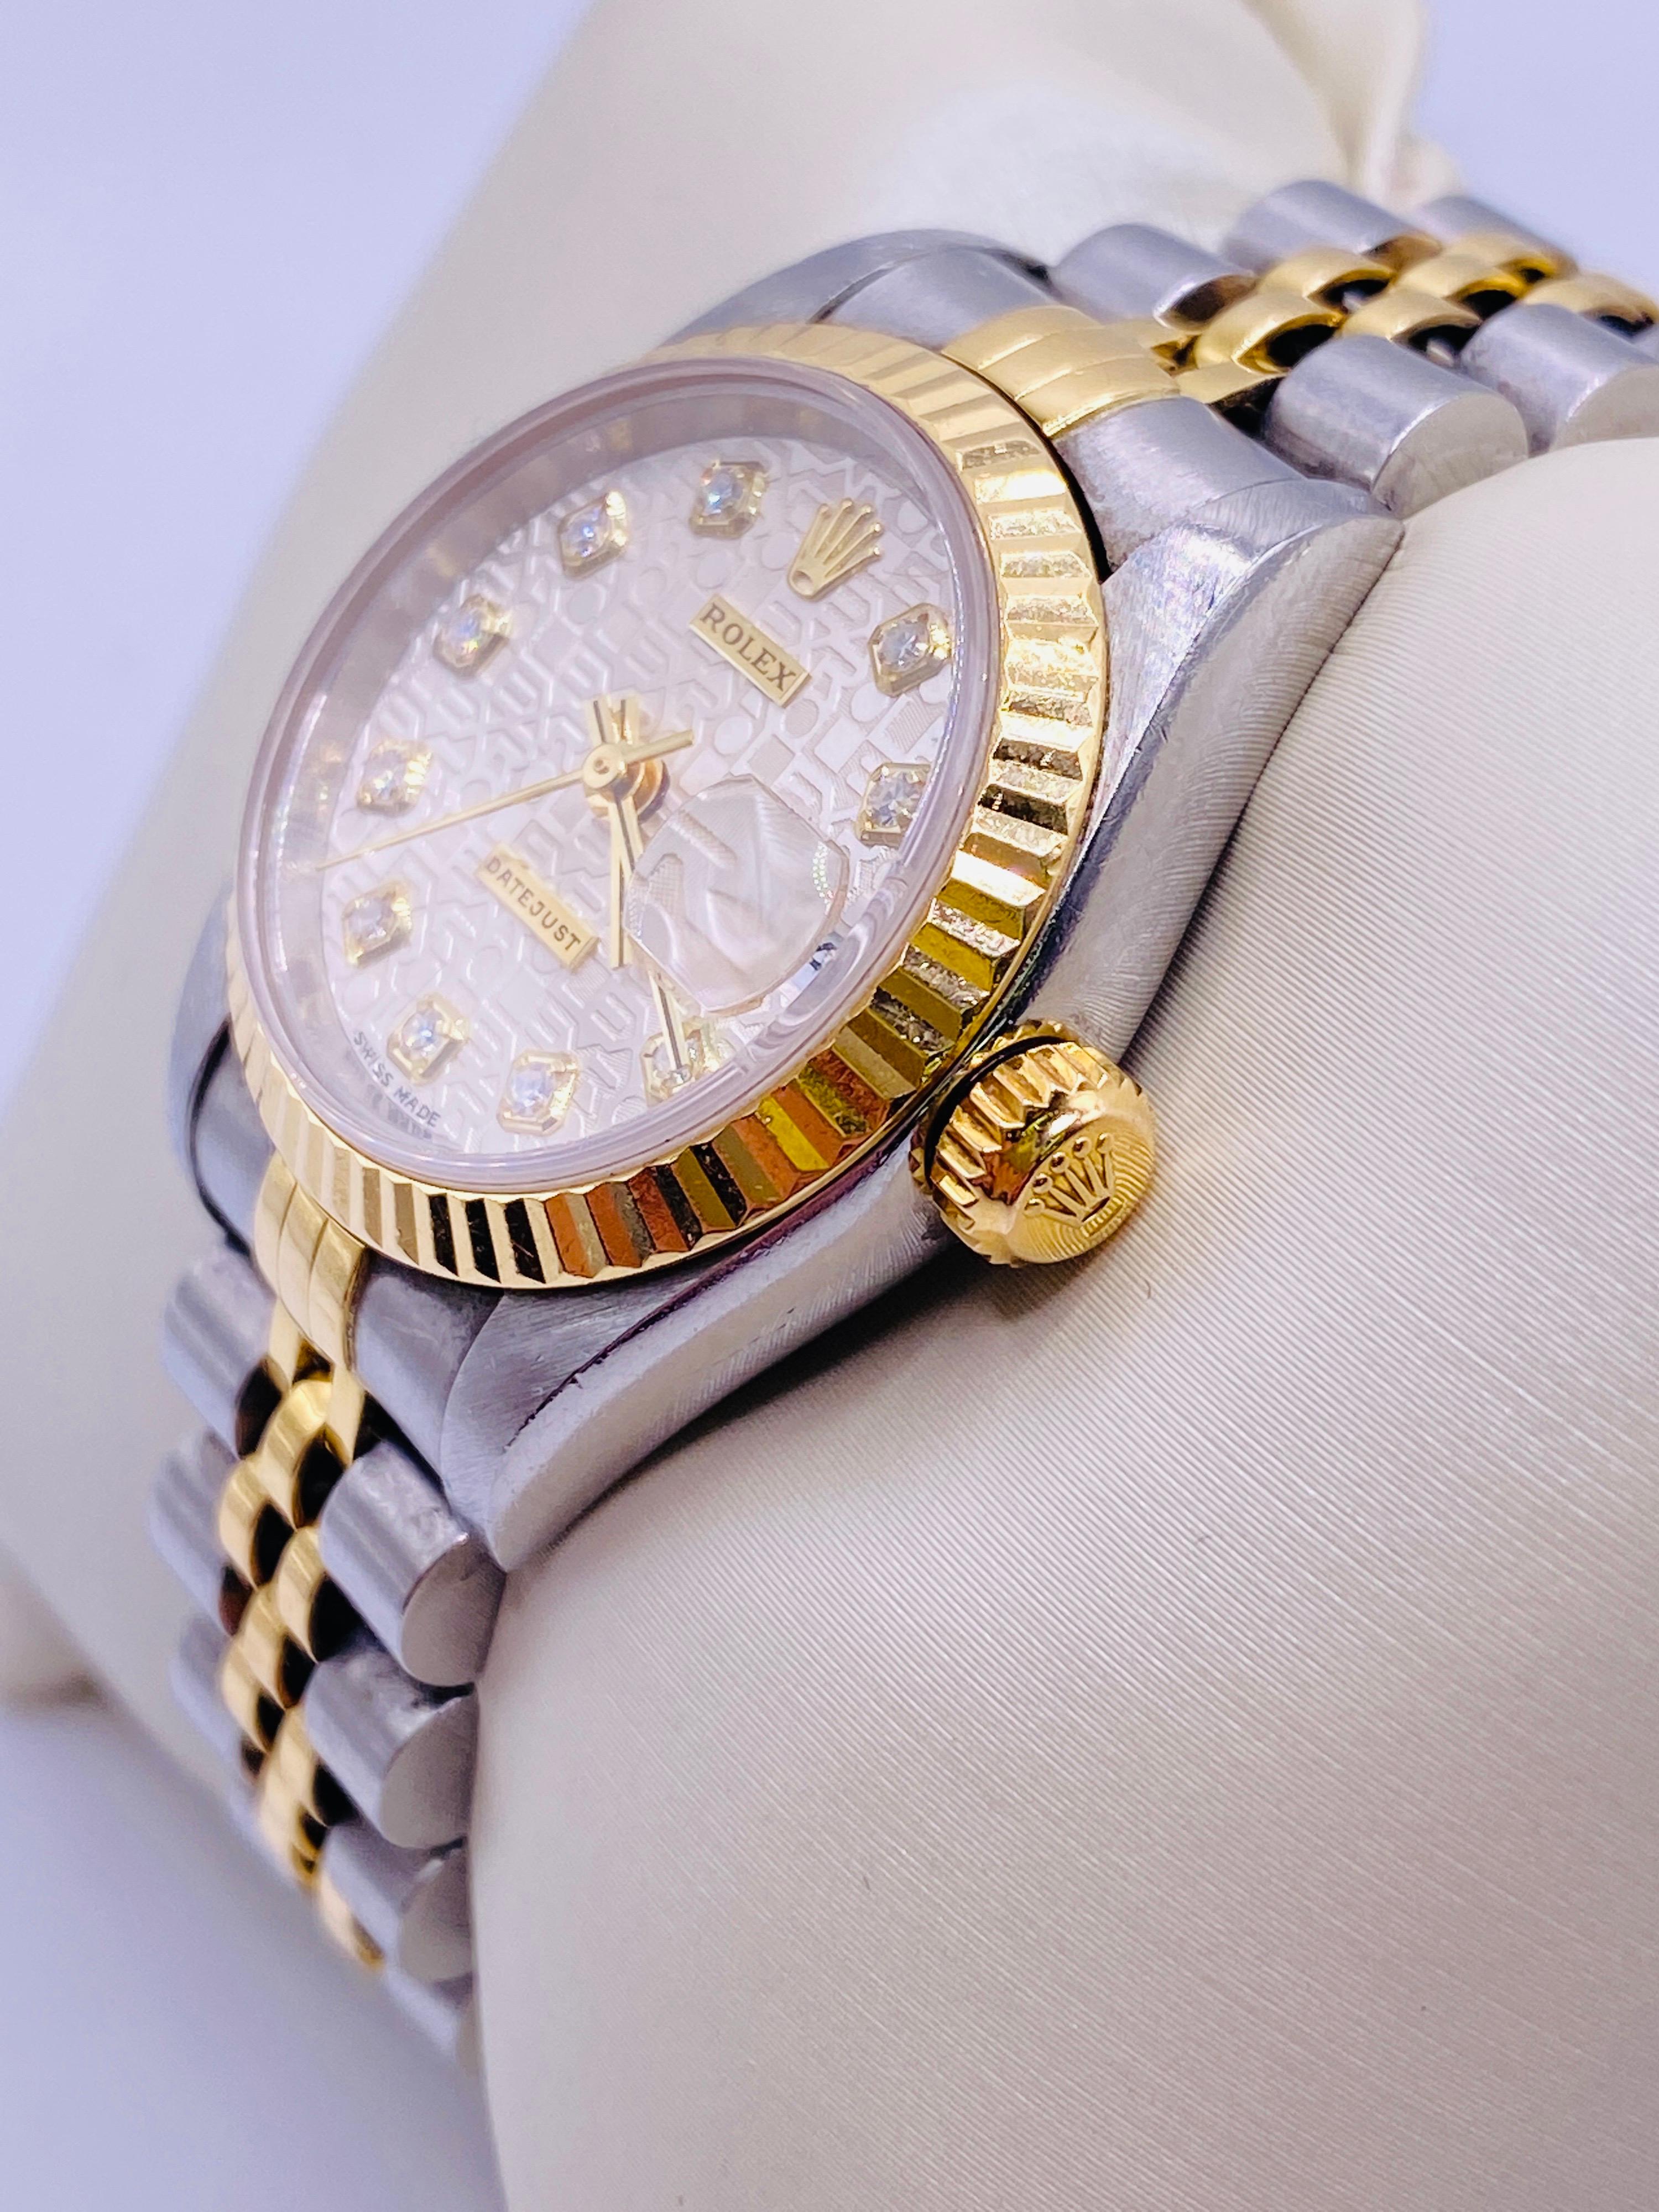 Two-tone 18k yellow gold and stainless steel Rolex Datejust model number 69173 with diamond white color jubilee dial. 26mm case. Box and papers included. SRL# u818816. Circa 1997. No apparent modifications. Fully serviced. 